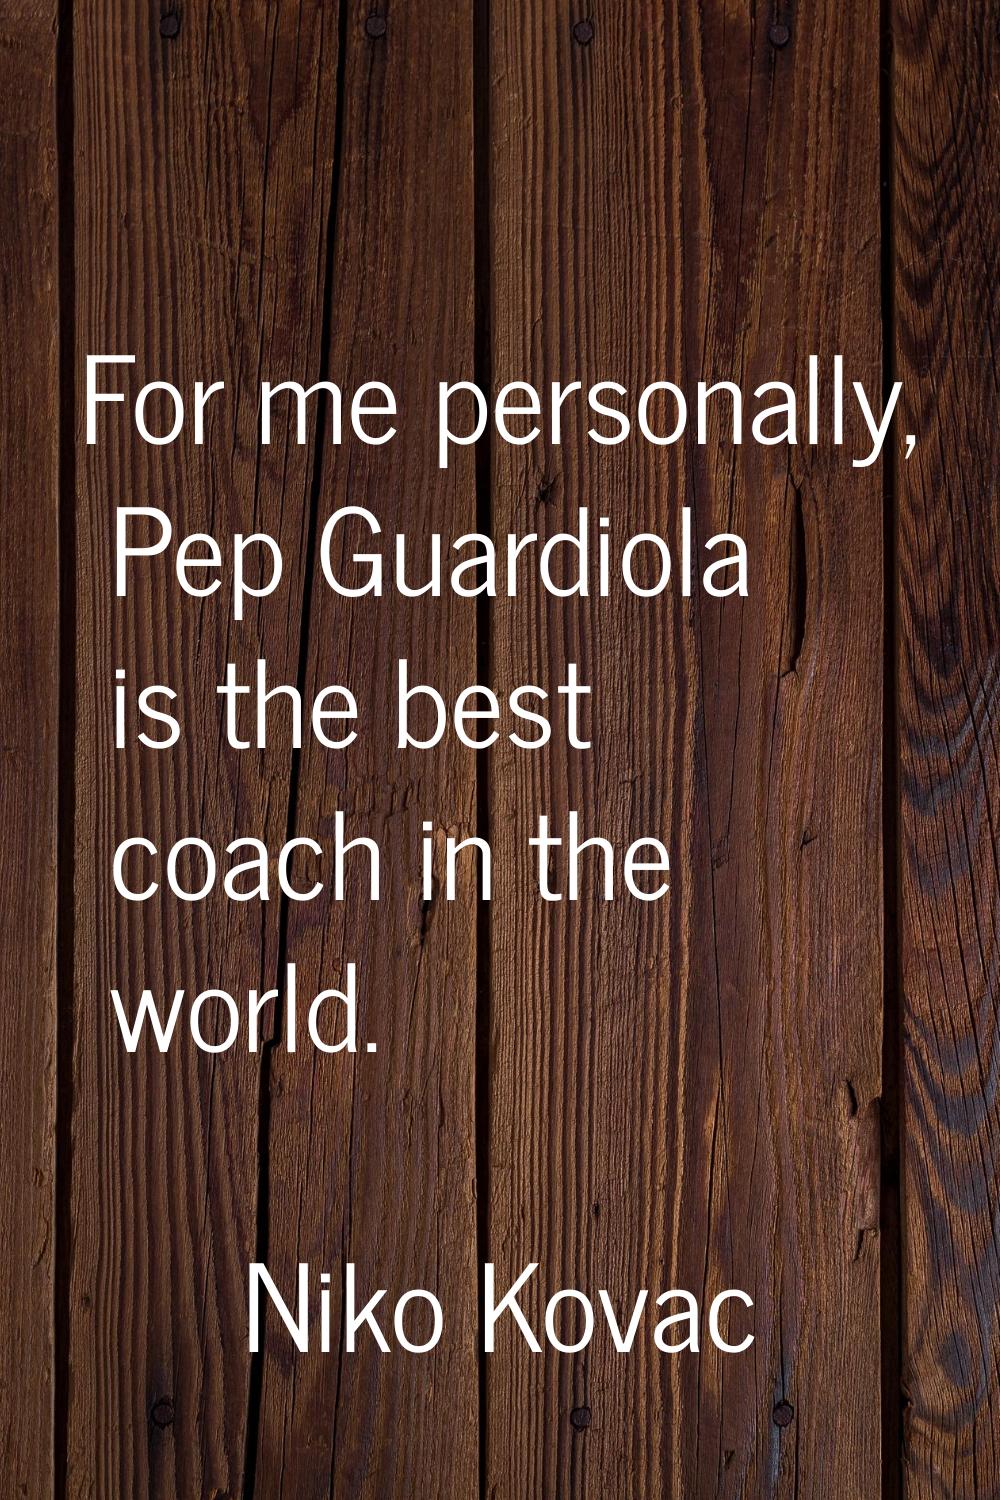 For me personally, Pep Guardiola is the best coach in the world.